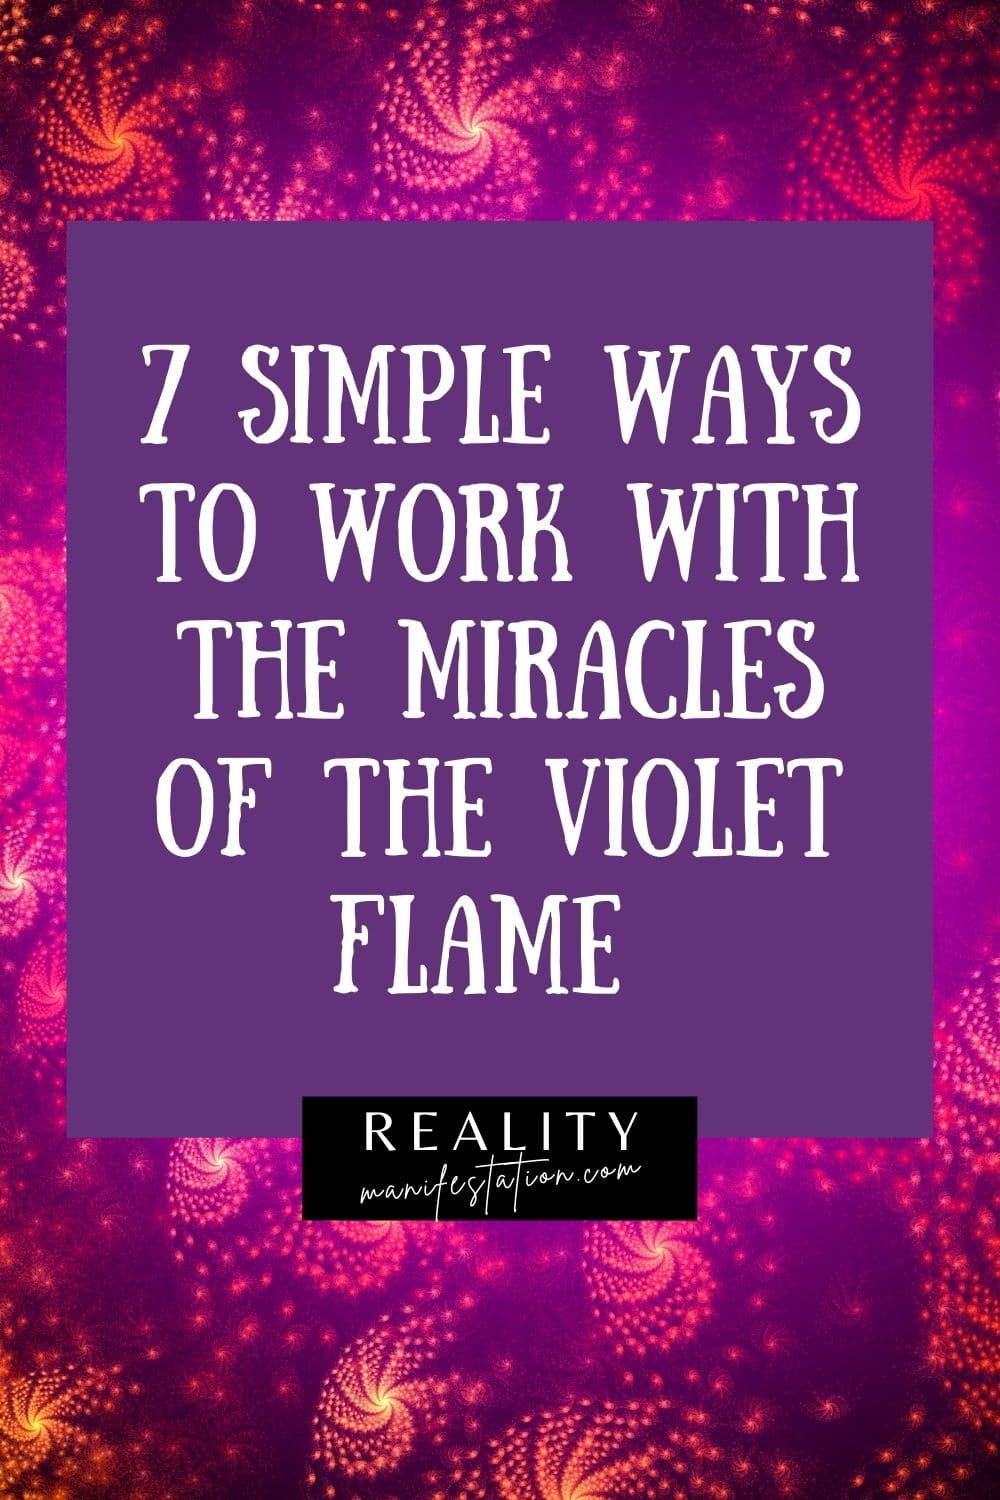 pinterest pin with background of purple sparks with a purple text box above saying 7 Simple Ways To Work With The Miracles of the Violet Flame